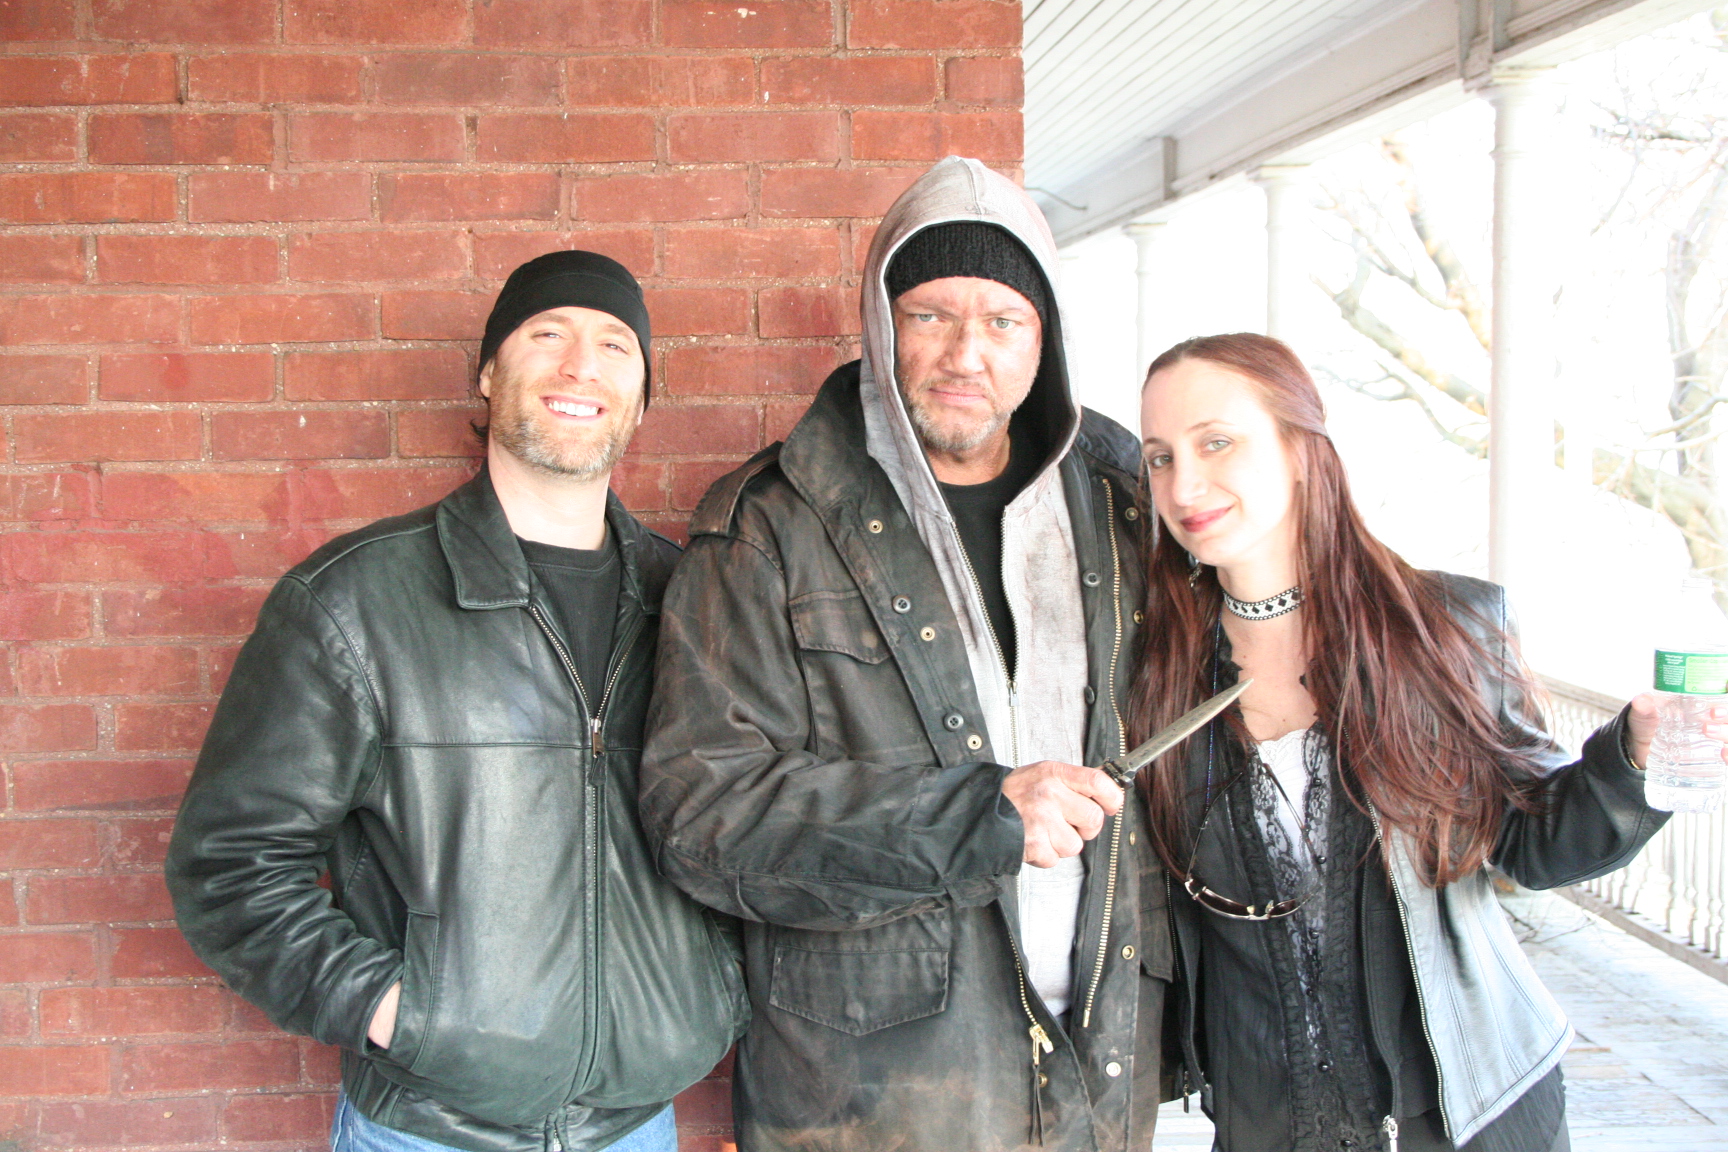 On location for 'The Burningmoore Incident' with actors Geoff Tate and Michele Wagner